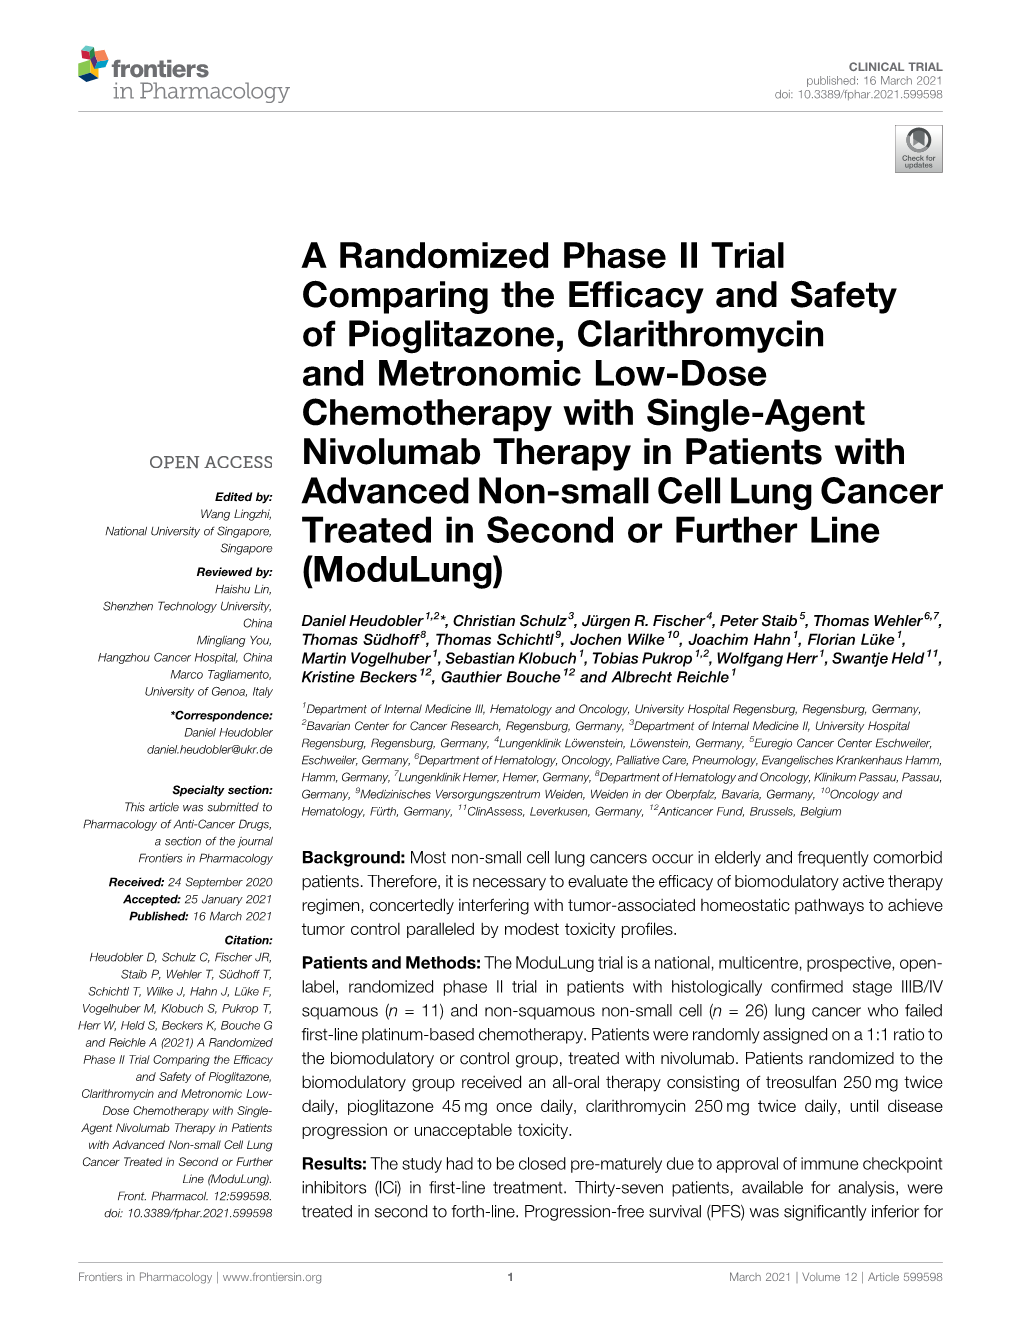 A Randomized Phase II Trial Comparing the Efficacy and Safety